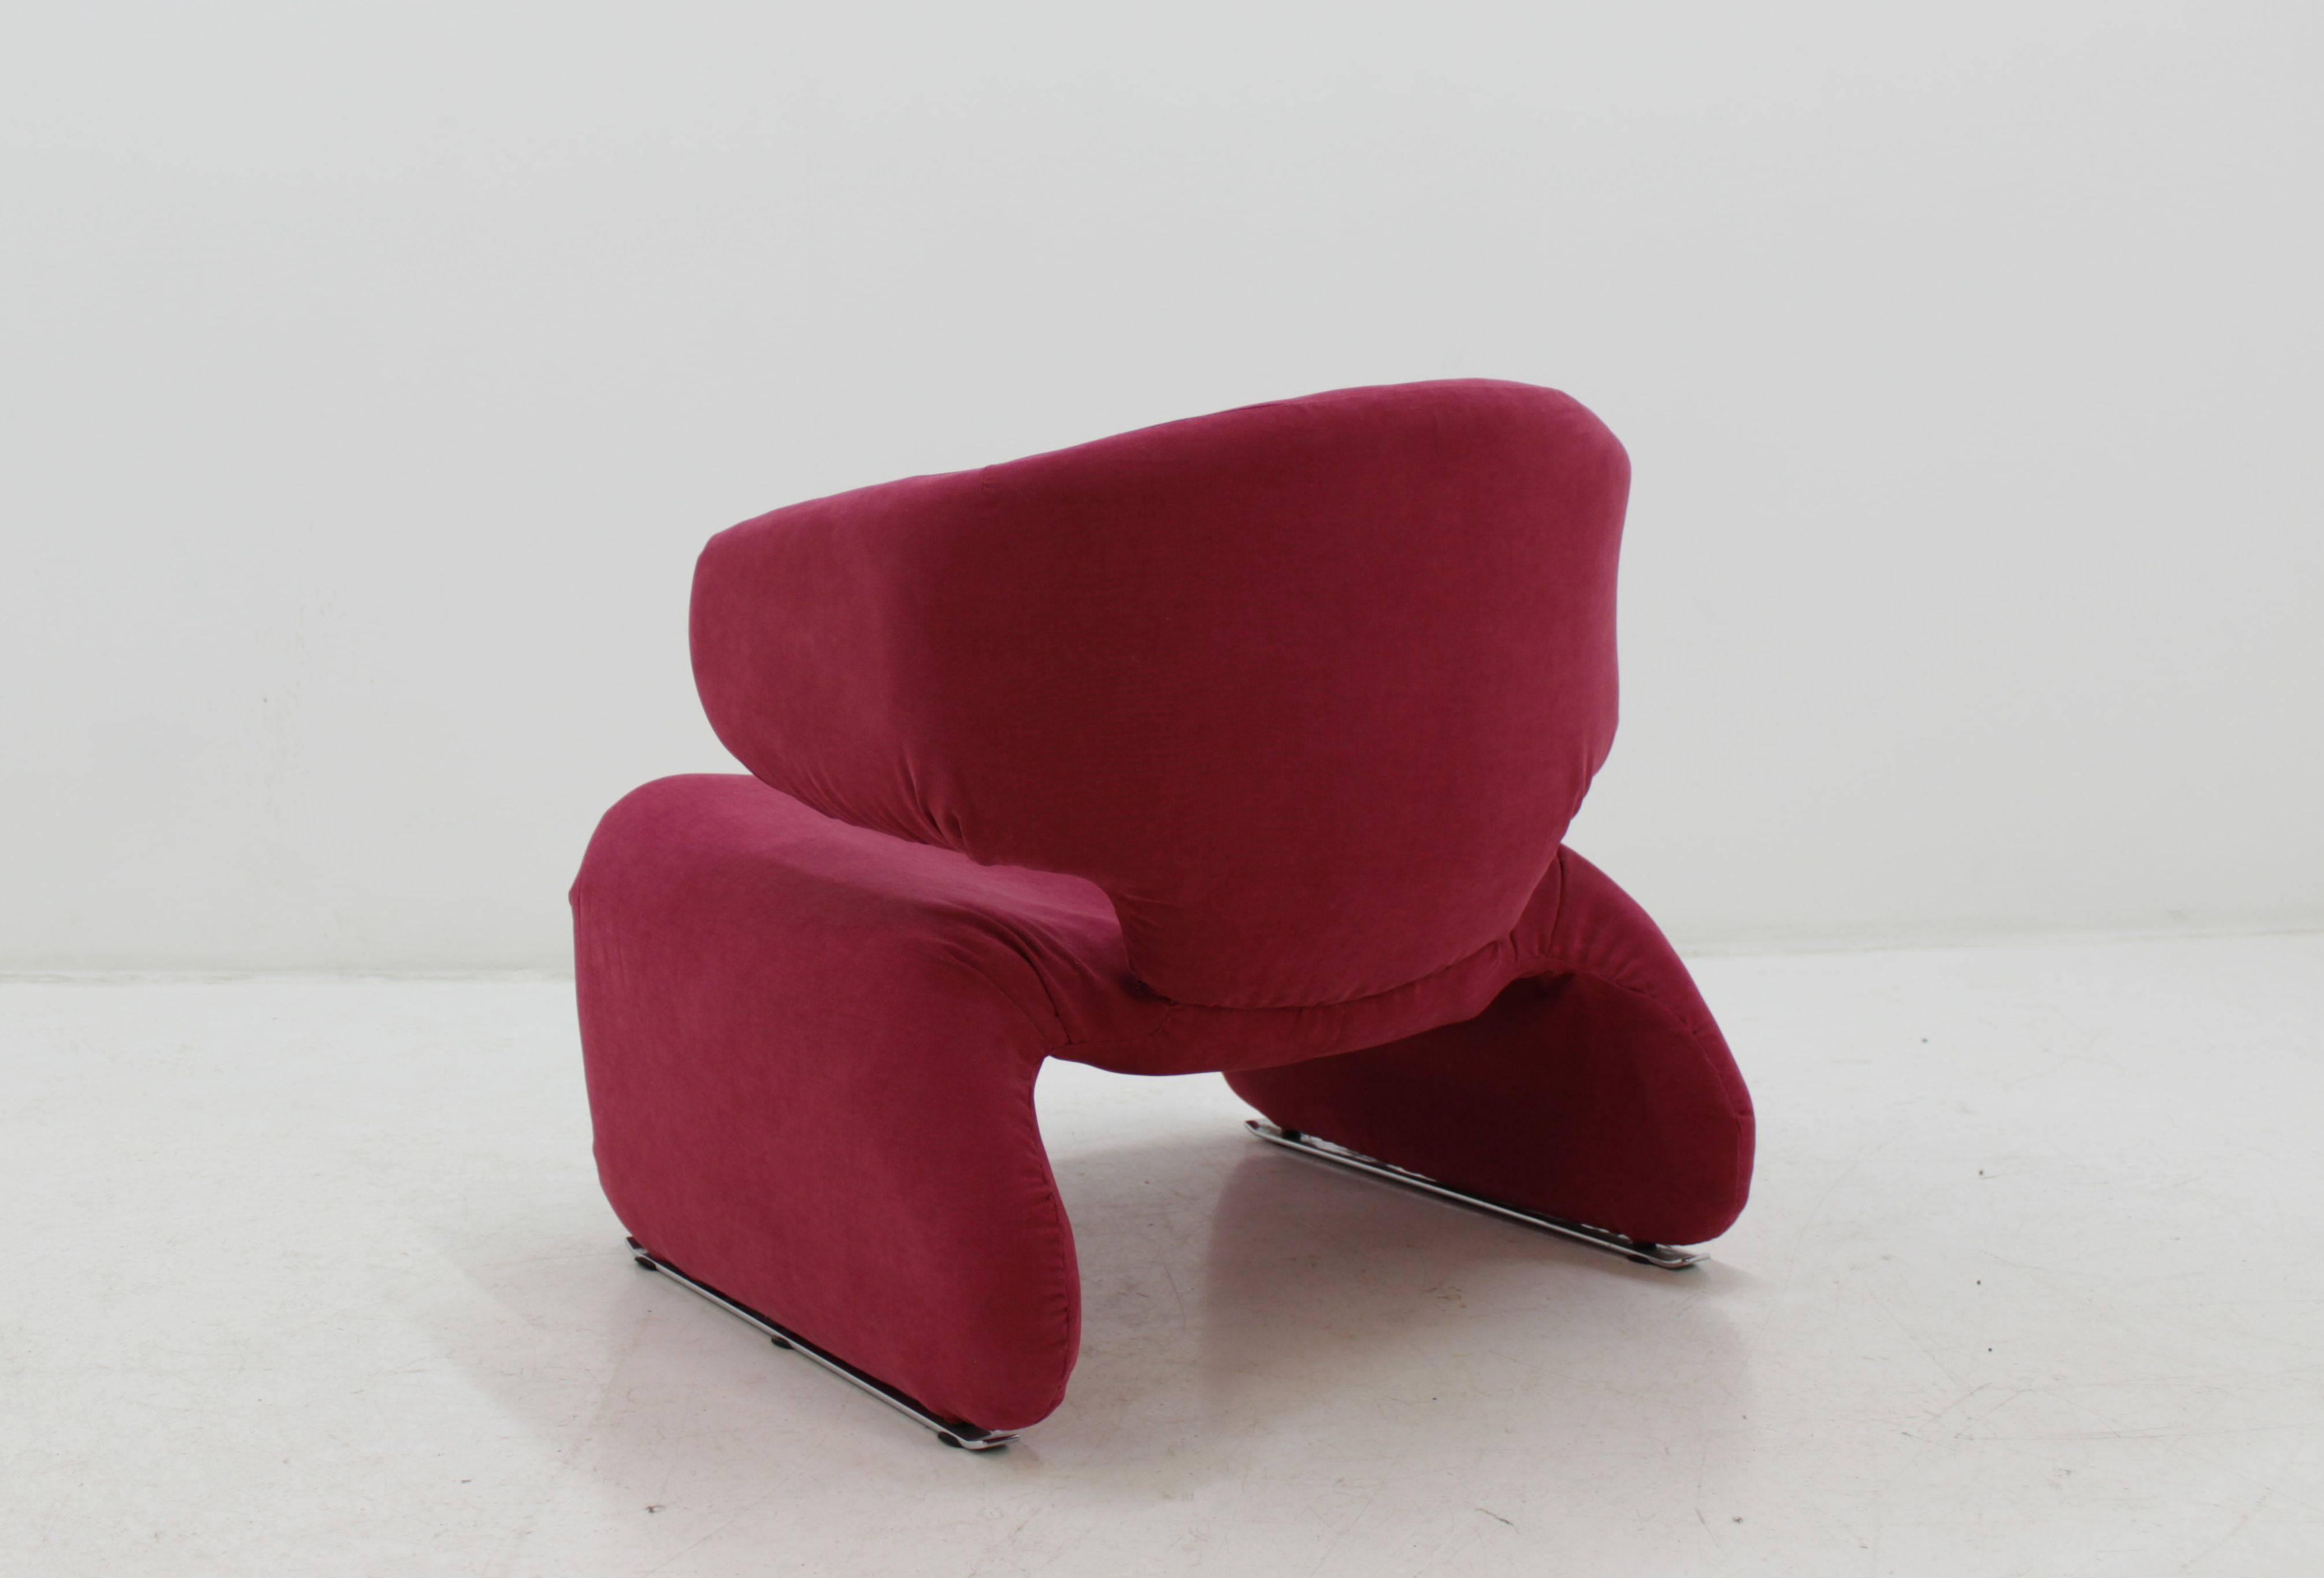 French Midcentury Djinn Lounge Chair for Airborne designed by Olivier Mourgue, 1960s